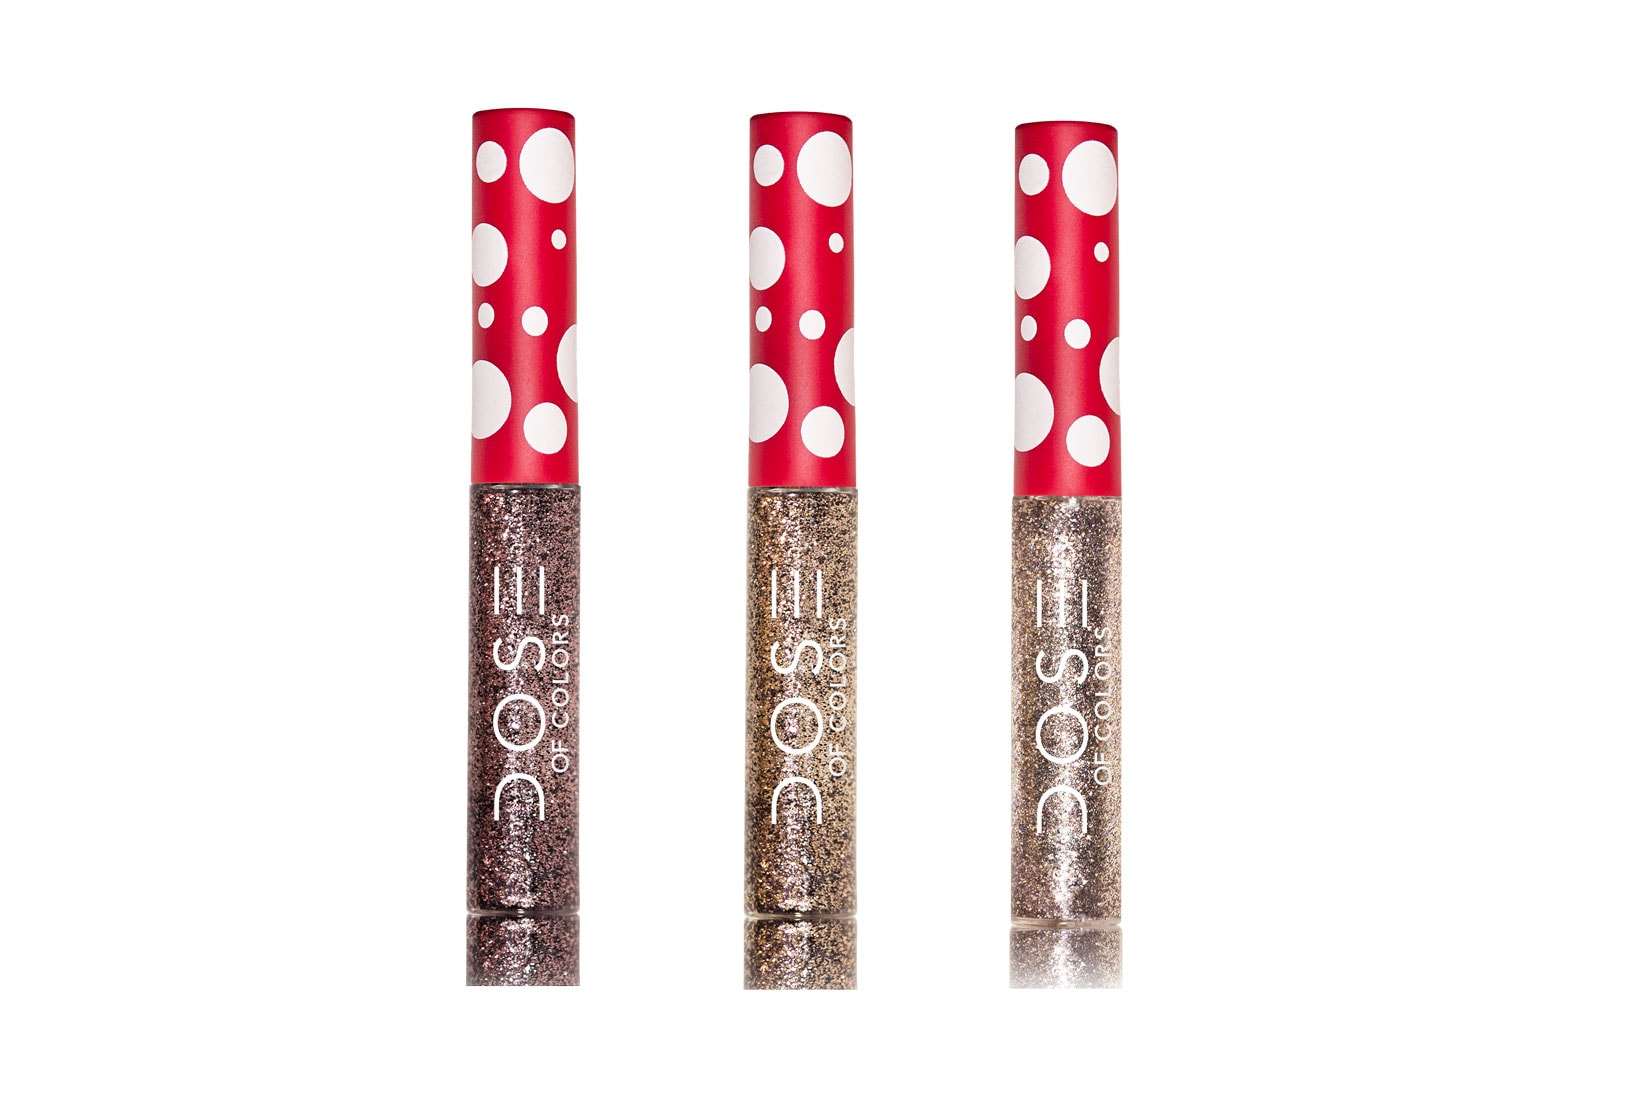 Minnie Mouse Dose of Colors Eyeliners Lipstick Eyeshadow